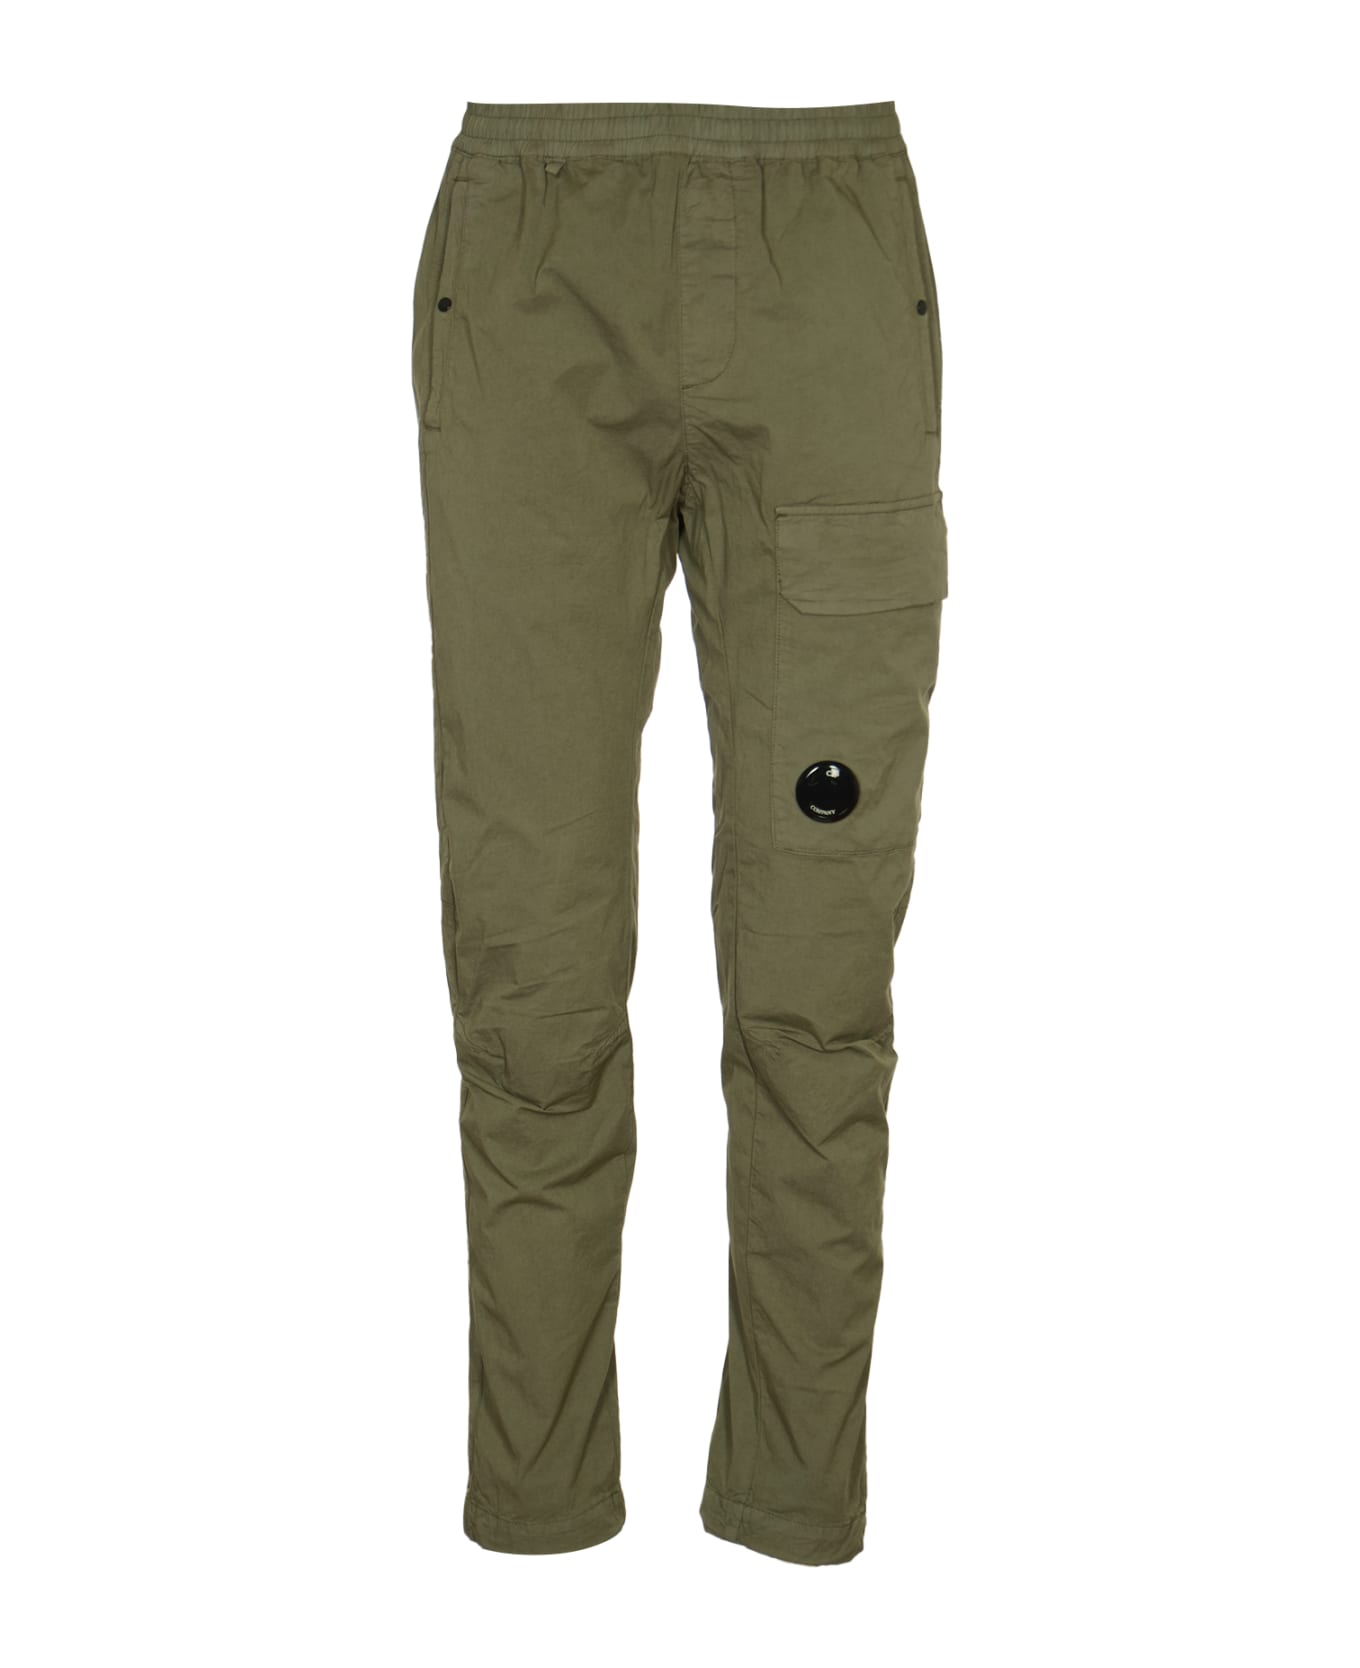 C.P. Company Twill Stretch Cargo Pants - AGAVE GREEN